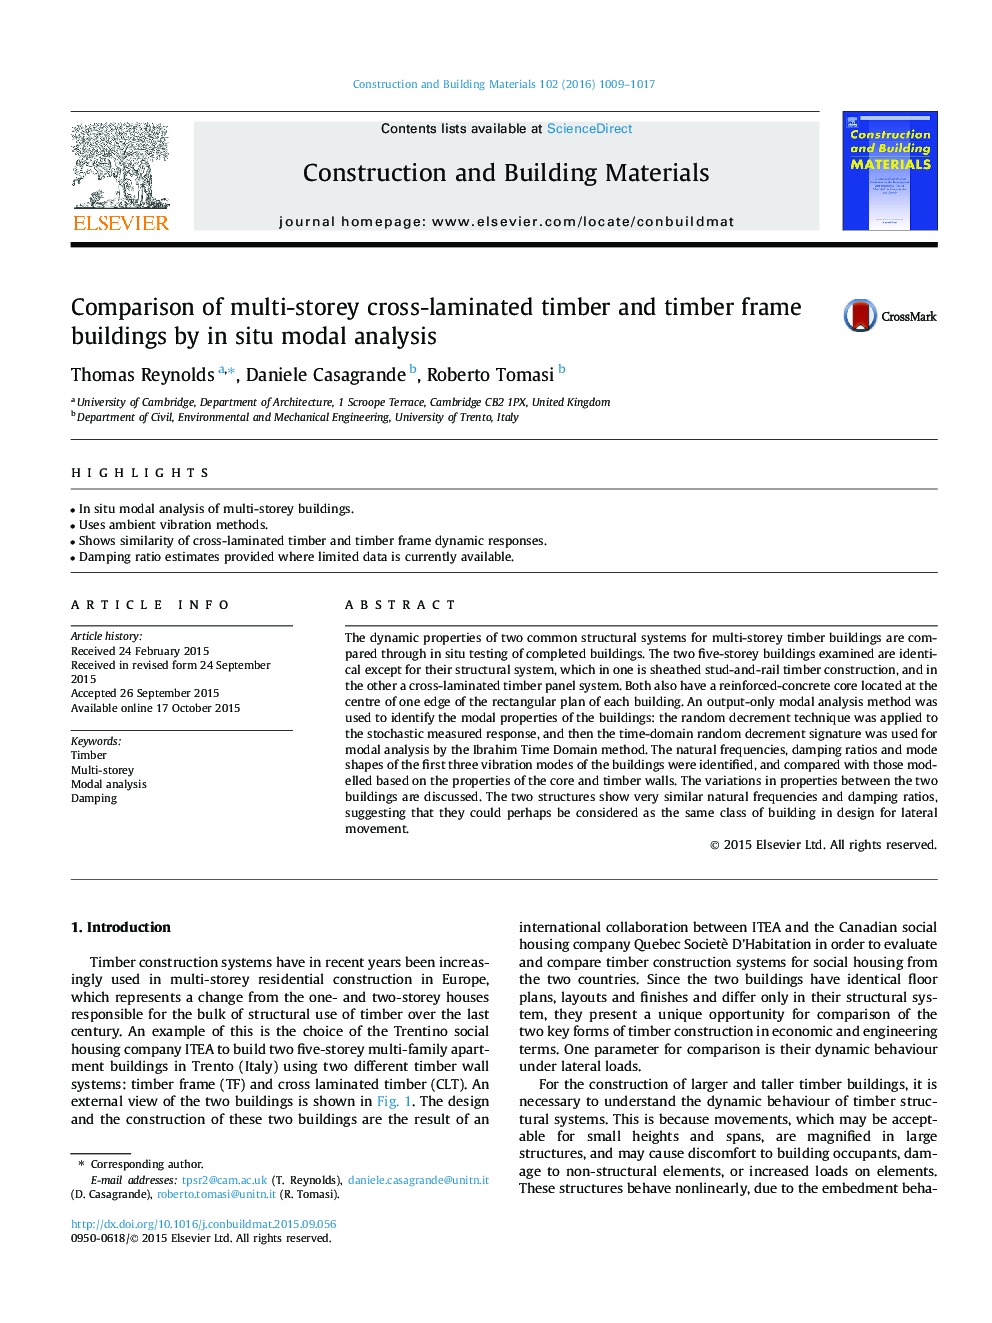 Comparison of multi-storey cross-laminated timber and timber frame buildings by in situ modal analysis